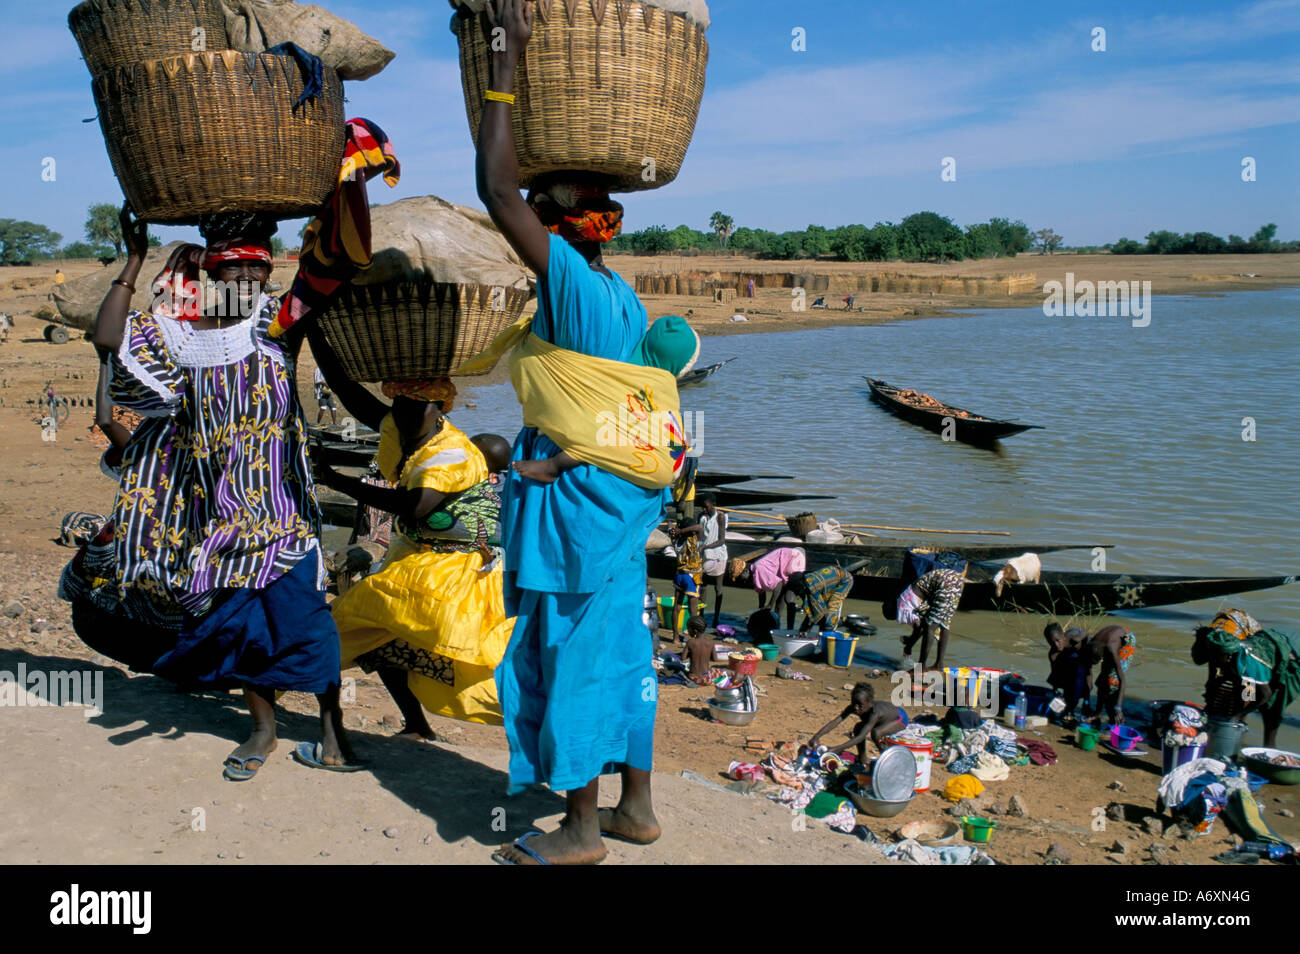 Women with baskets of laundry on their heads beside the river Djenne Mali  Africa Stock Photo - Alamy